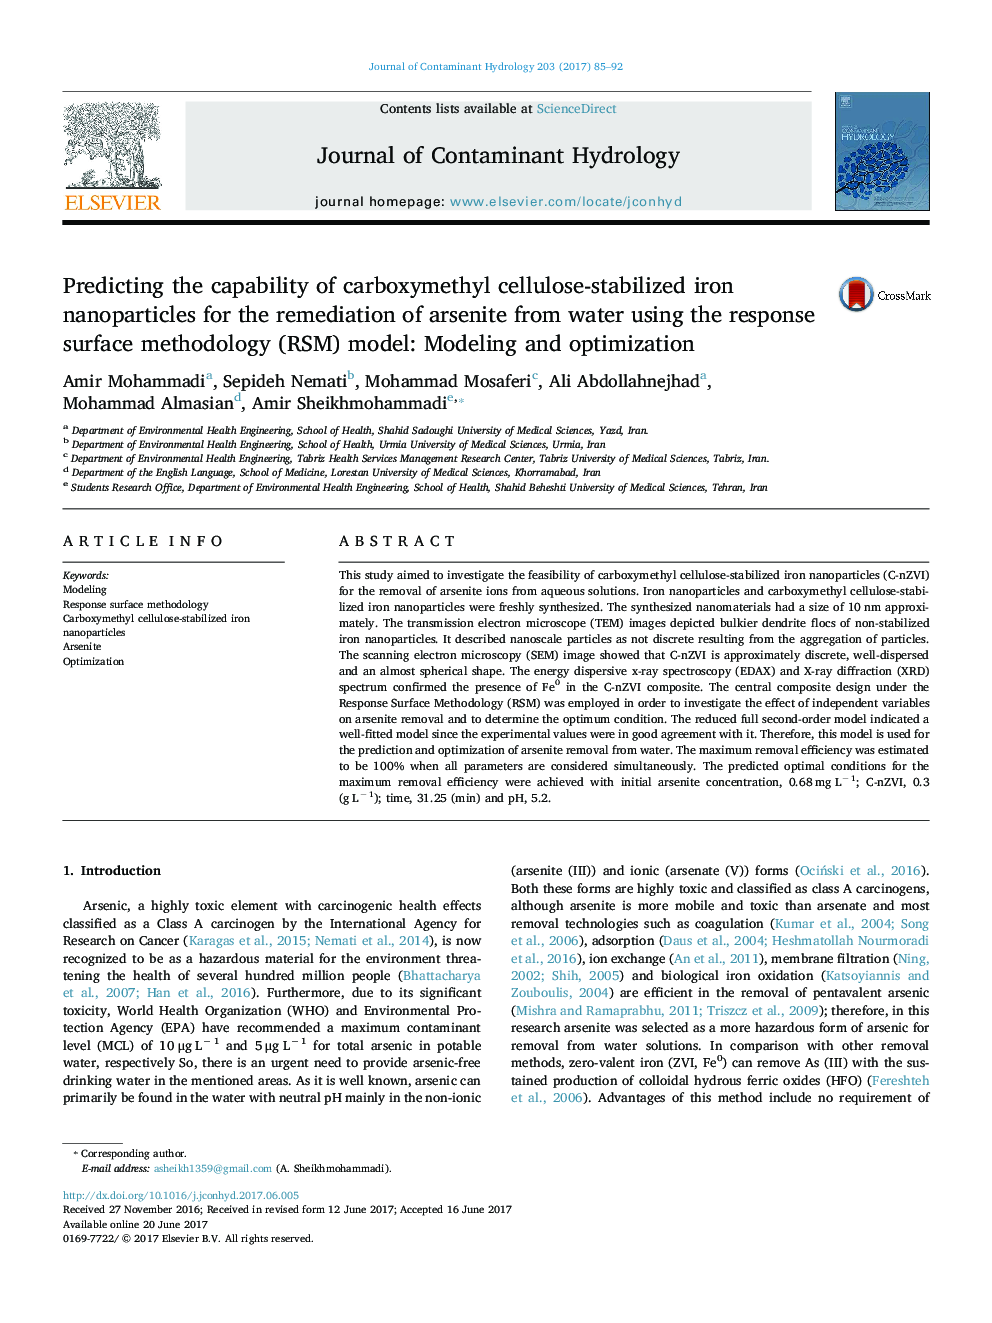 Predicting the capability of carboxymethyl cellulose-stabilized iron nanoparticles for the remediation of arsenite from water using the response surface methodology (RSM) model: Modeling and optimization